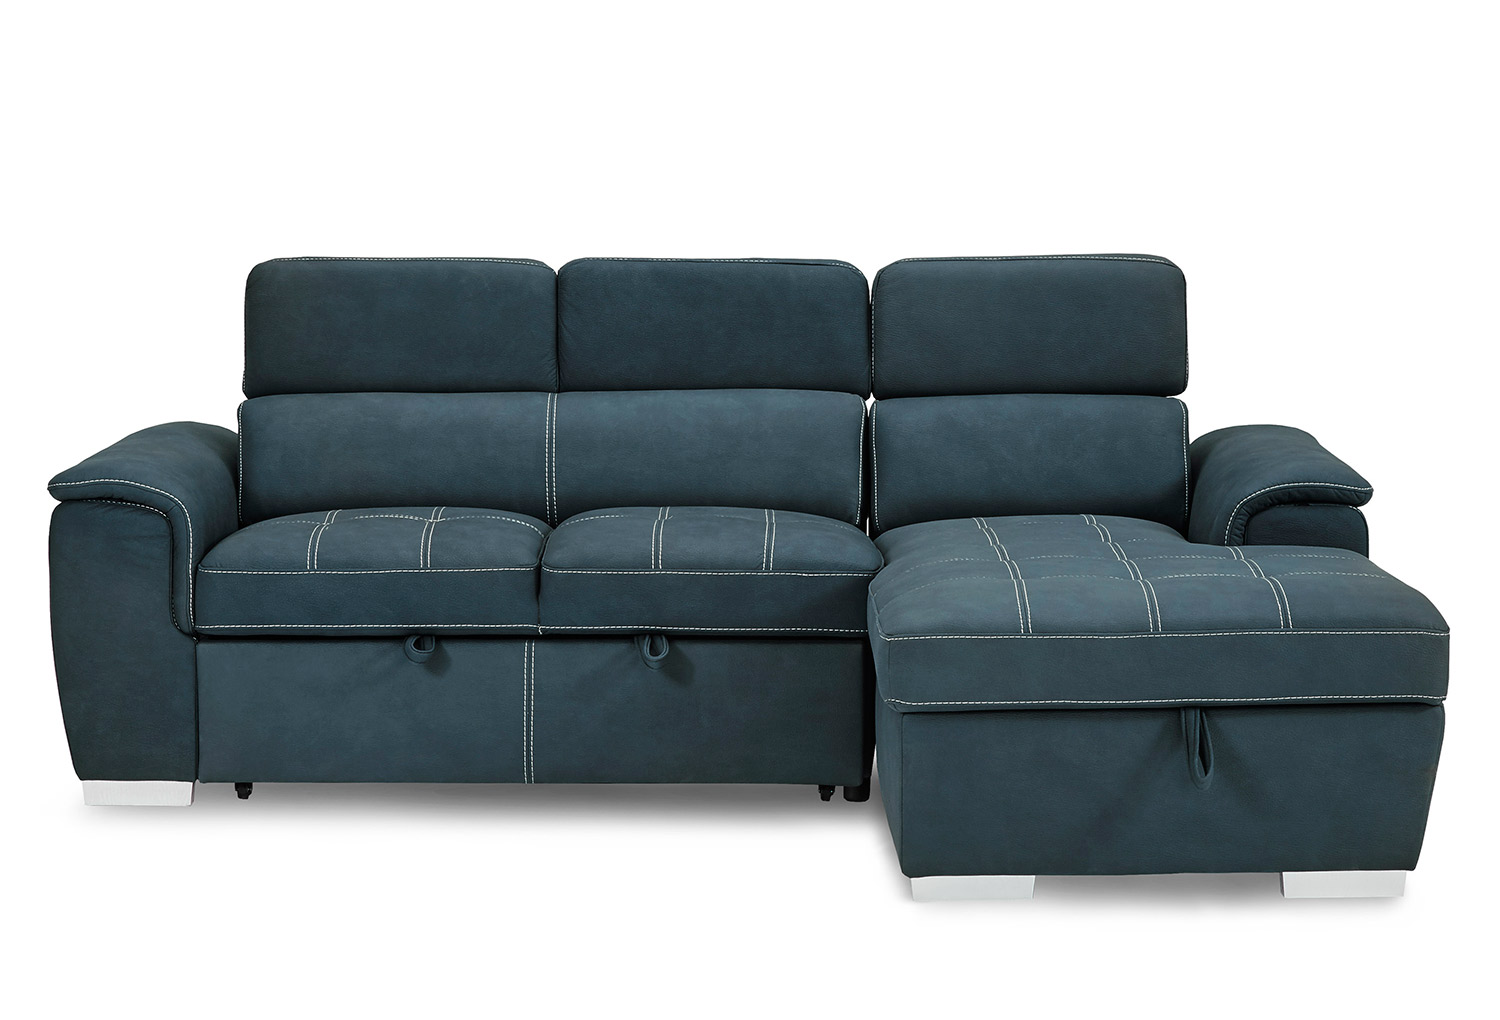 Homelegance Ferriday Sectional With, Sectional Sofa Set With Pull Out Sleeper Area